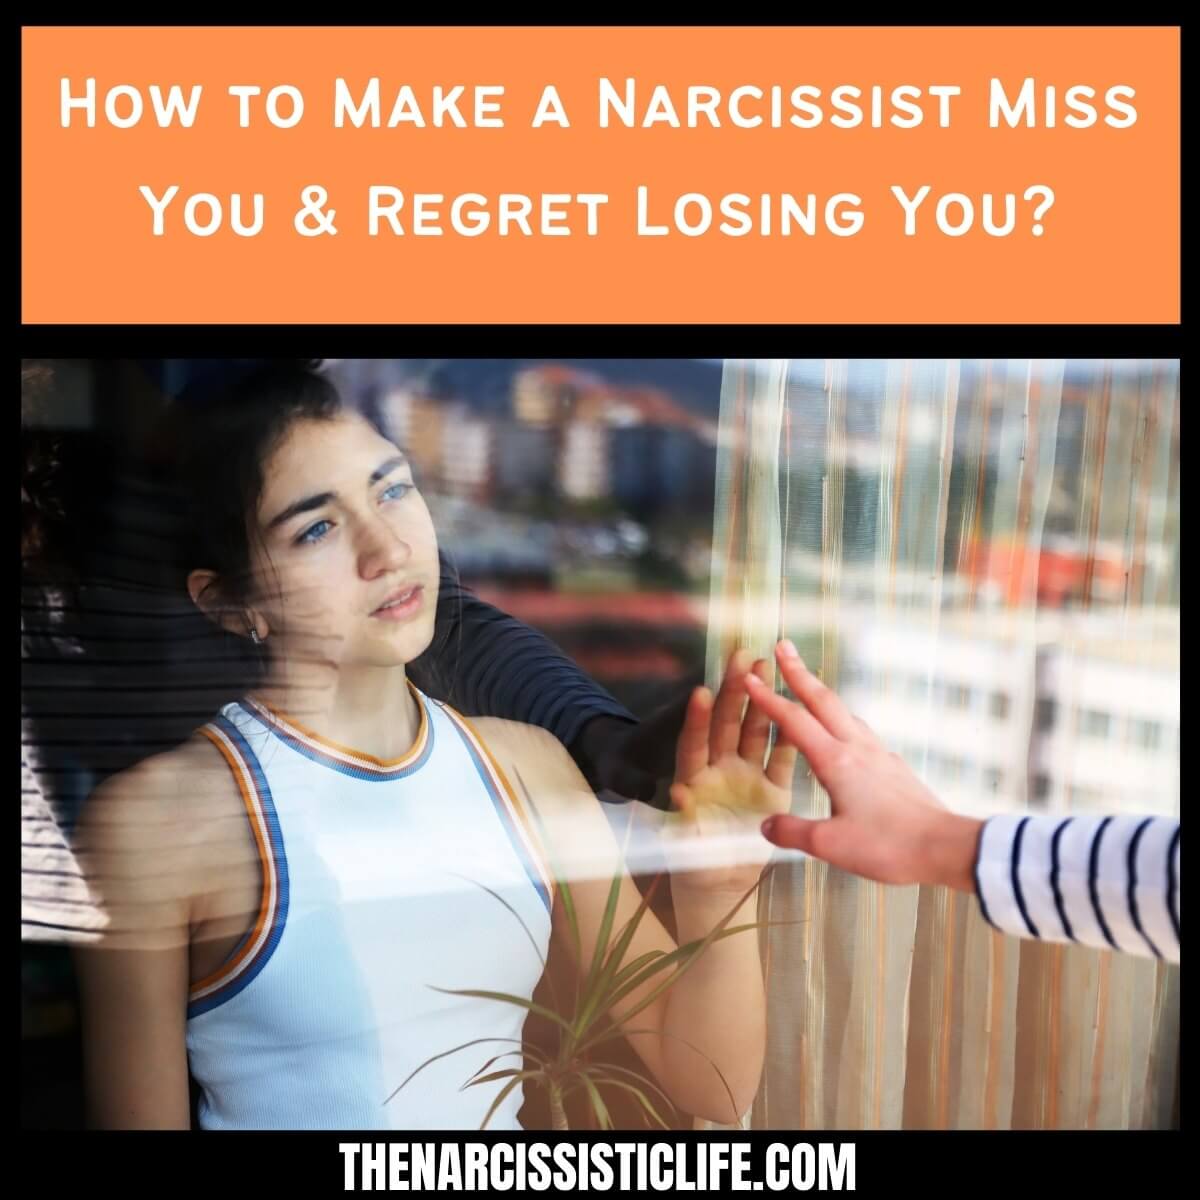 How to Make a Narcissist Miss You & Regret Losing You? - The Narcissistic Life